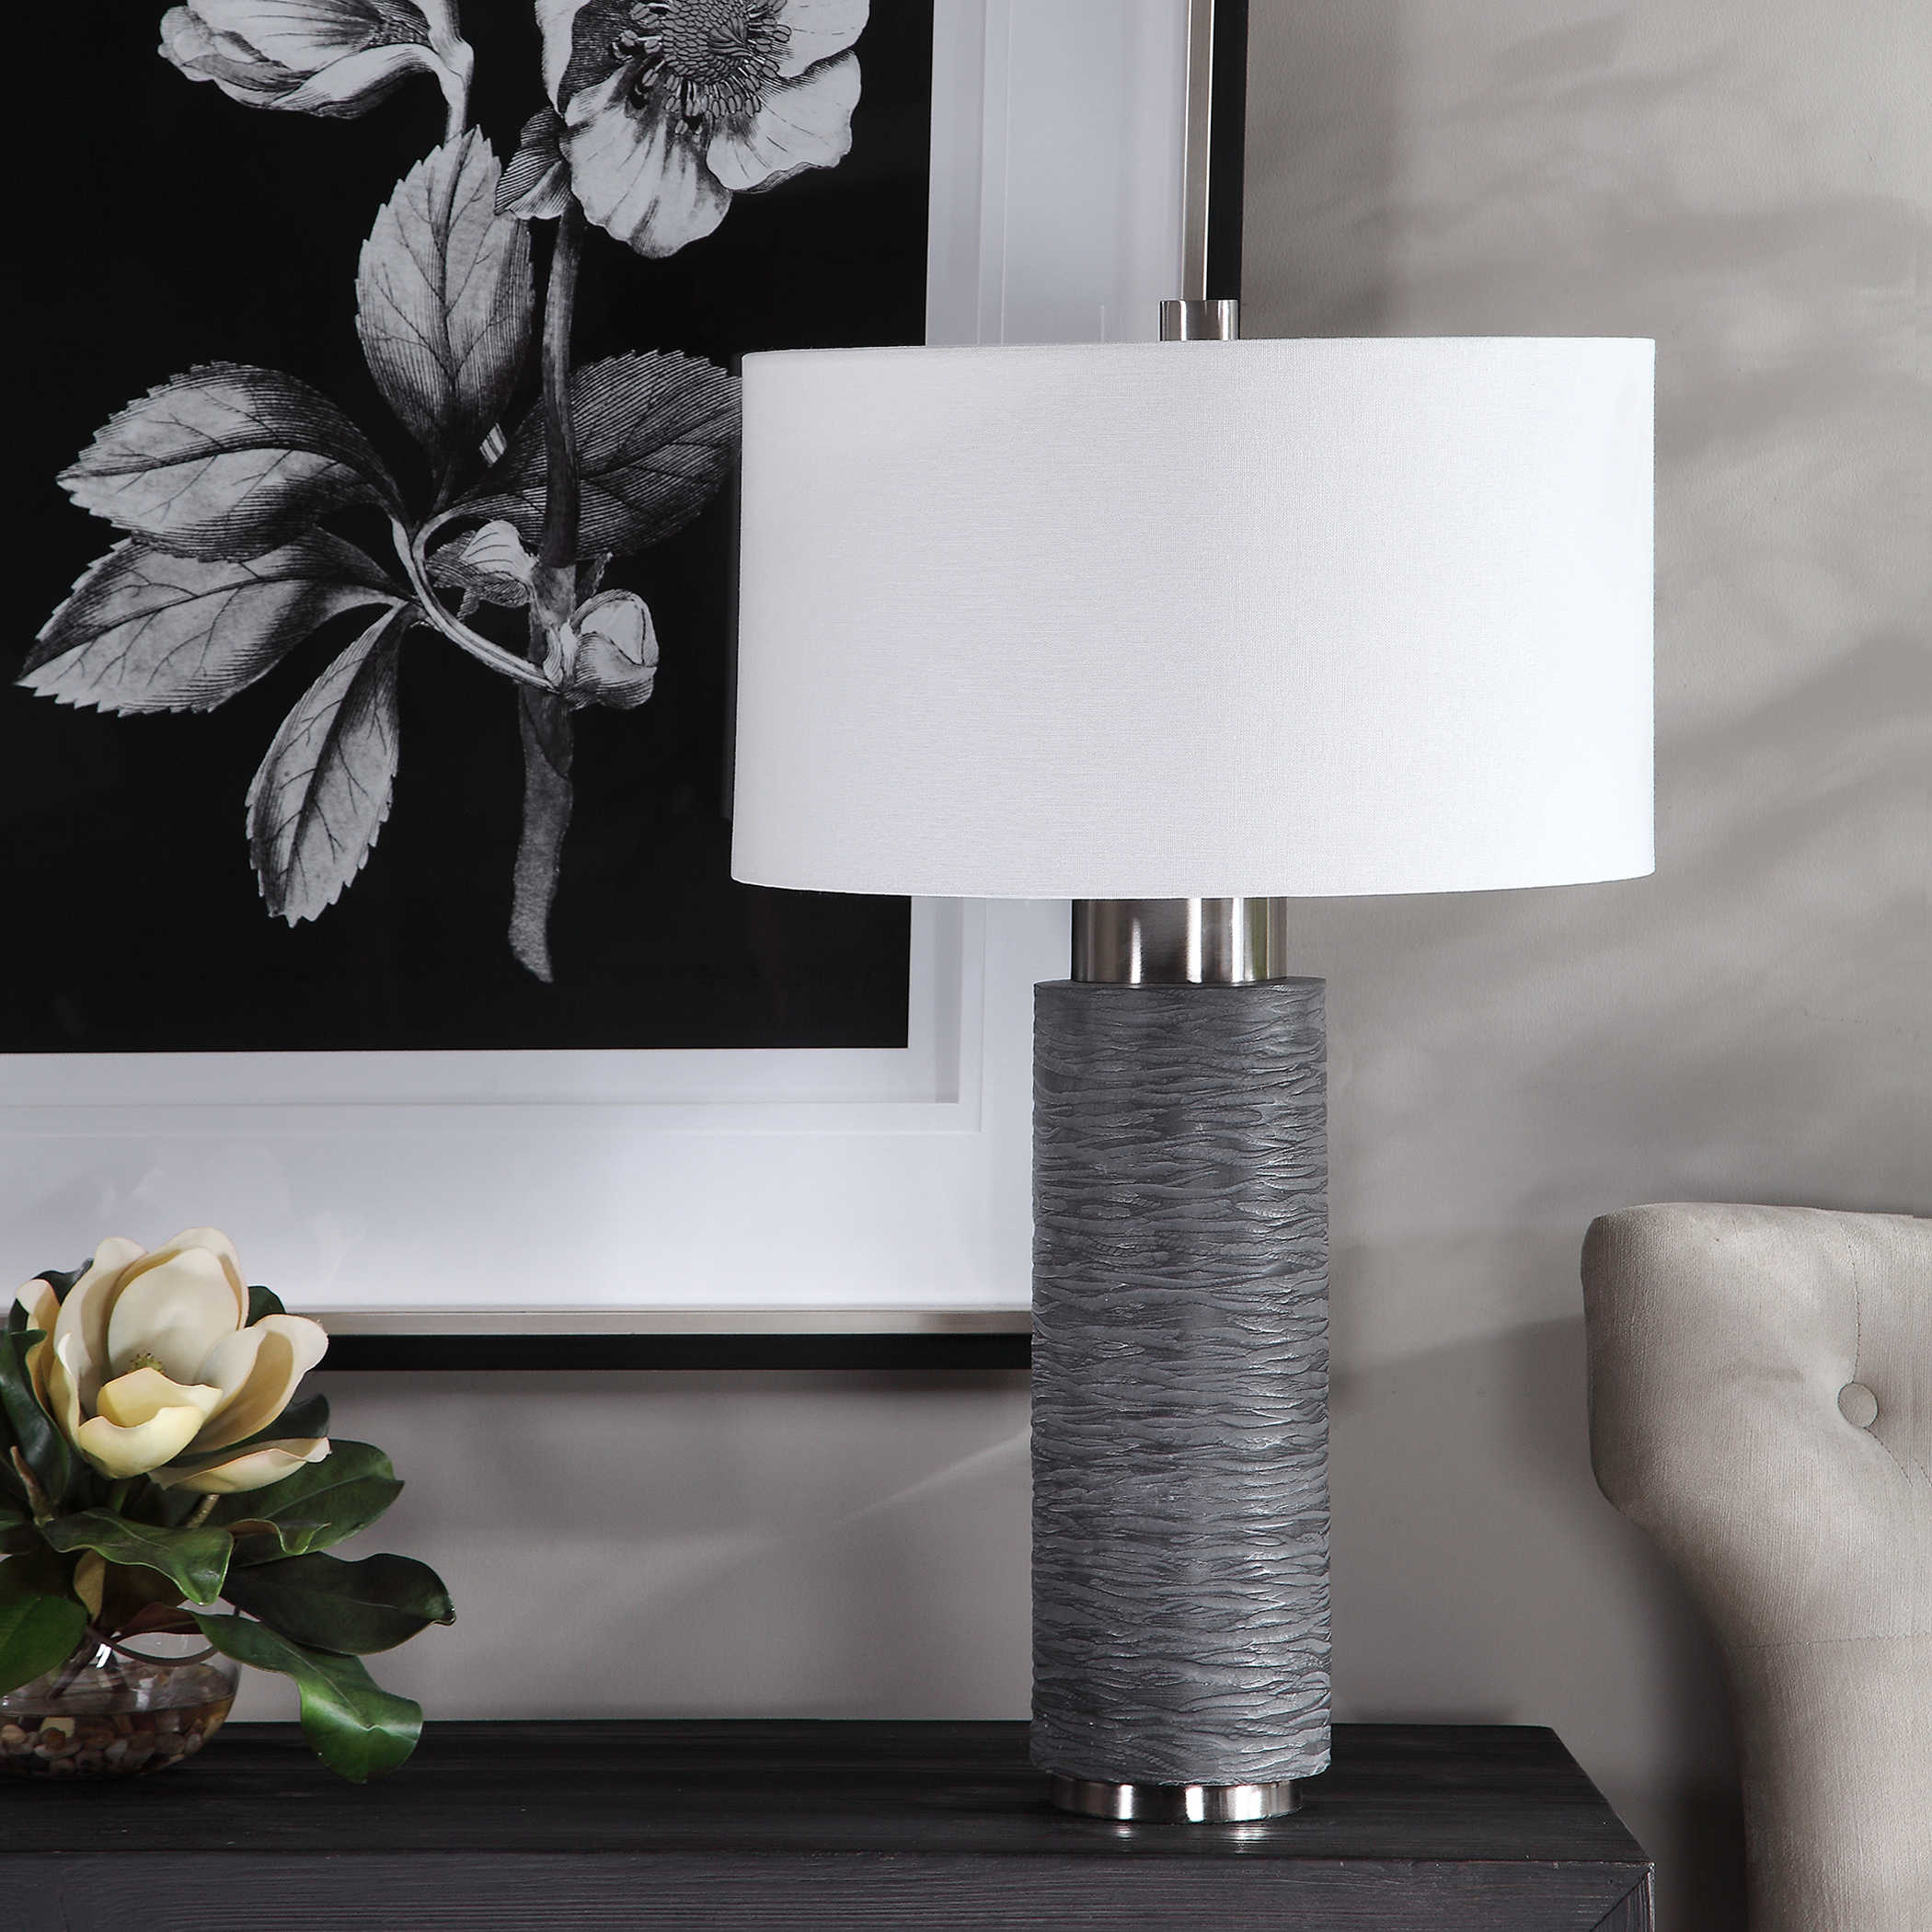 STRATHMORE TABLE LAMP